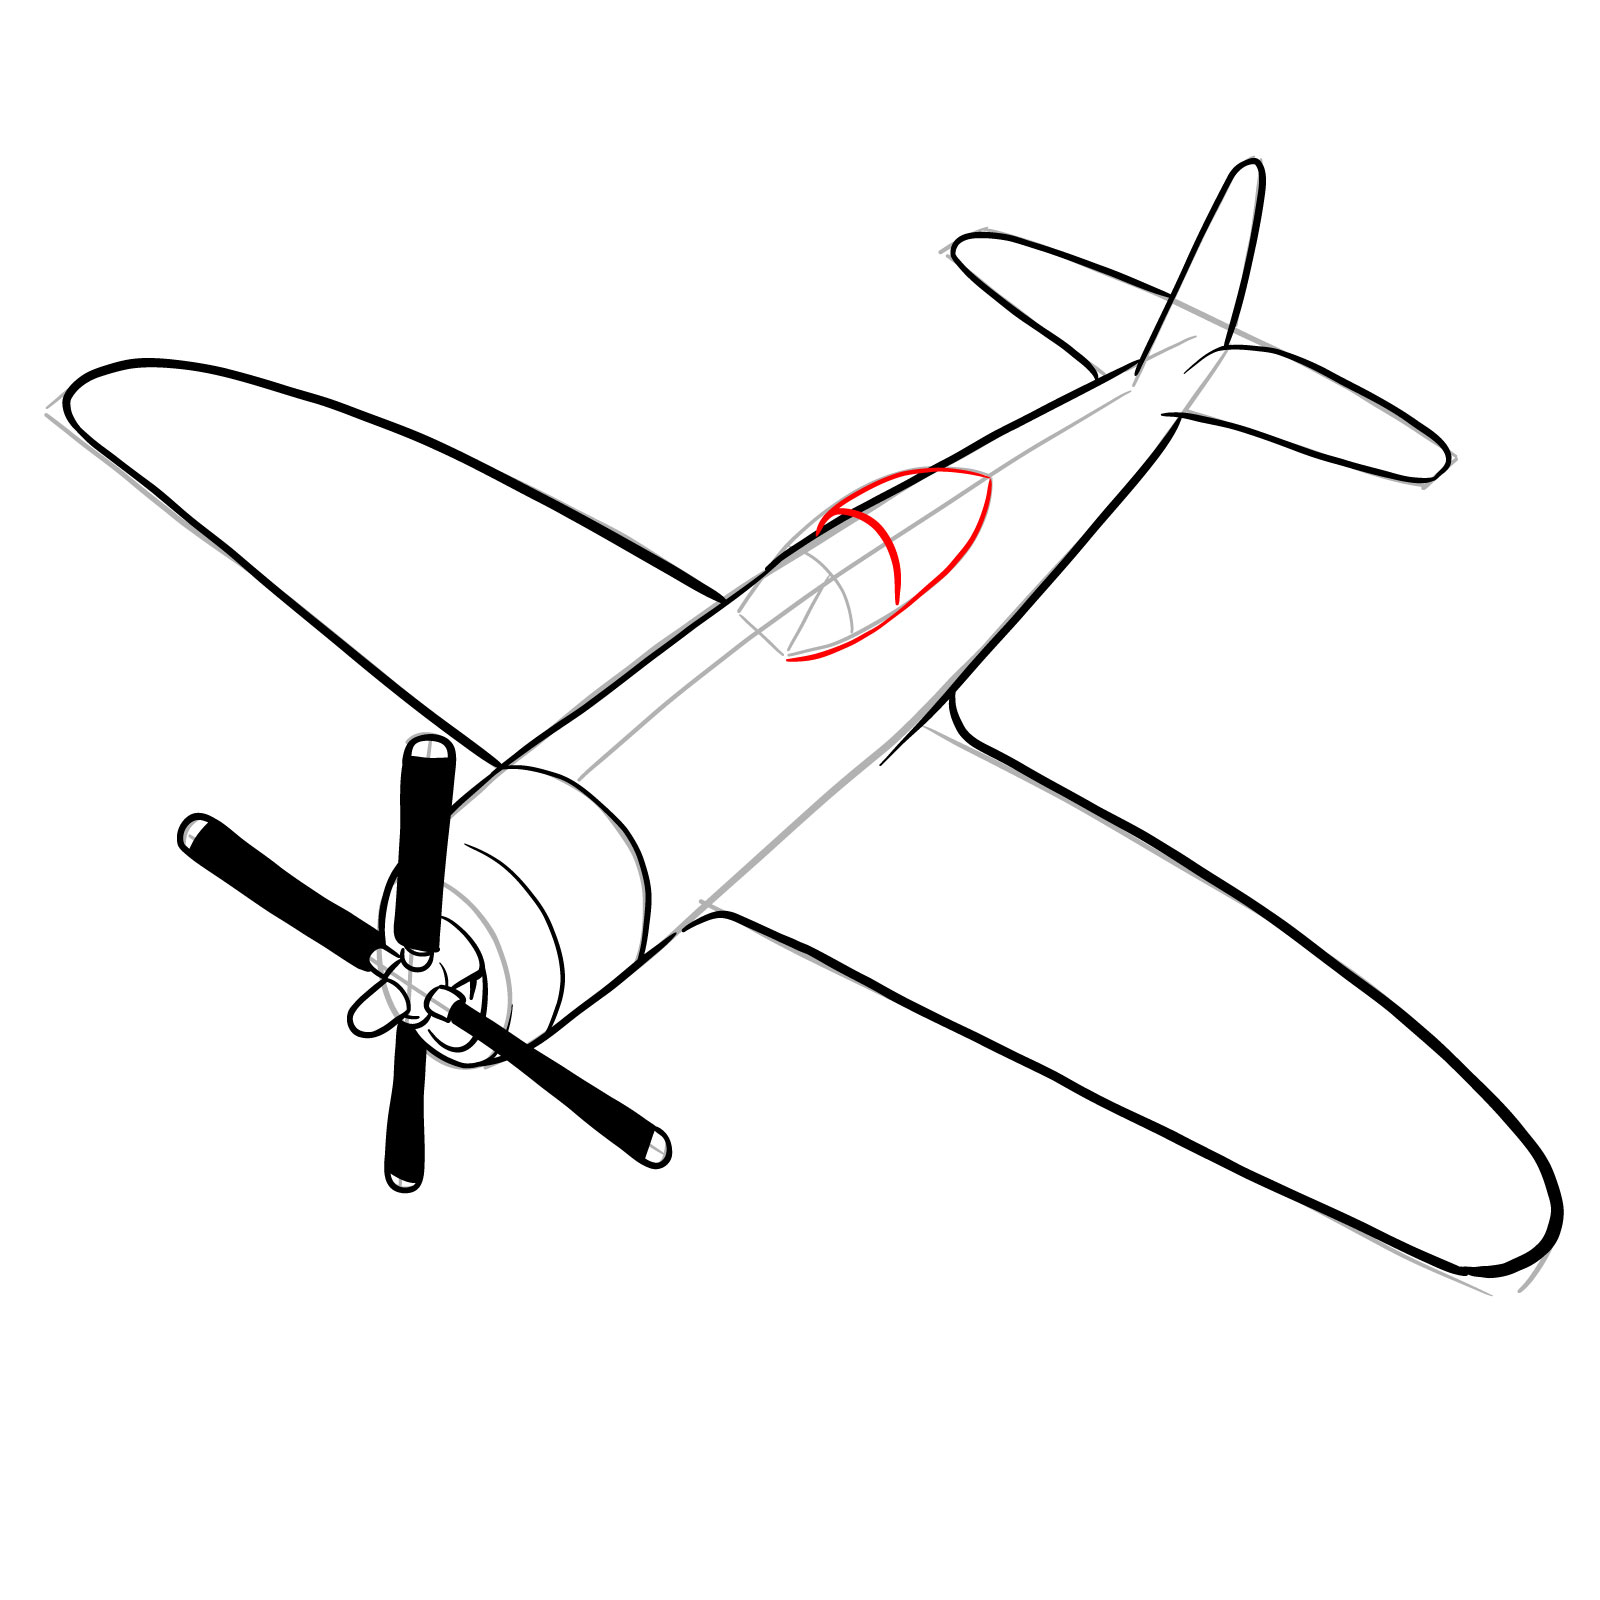 How to draw the Republic P-47 Thunderbolt - step 19